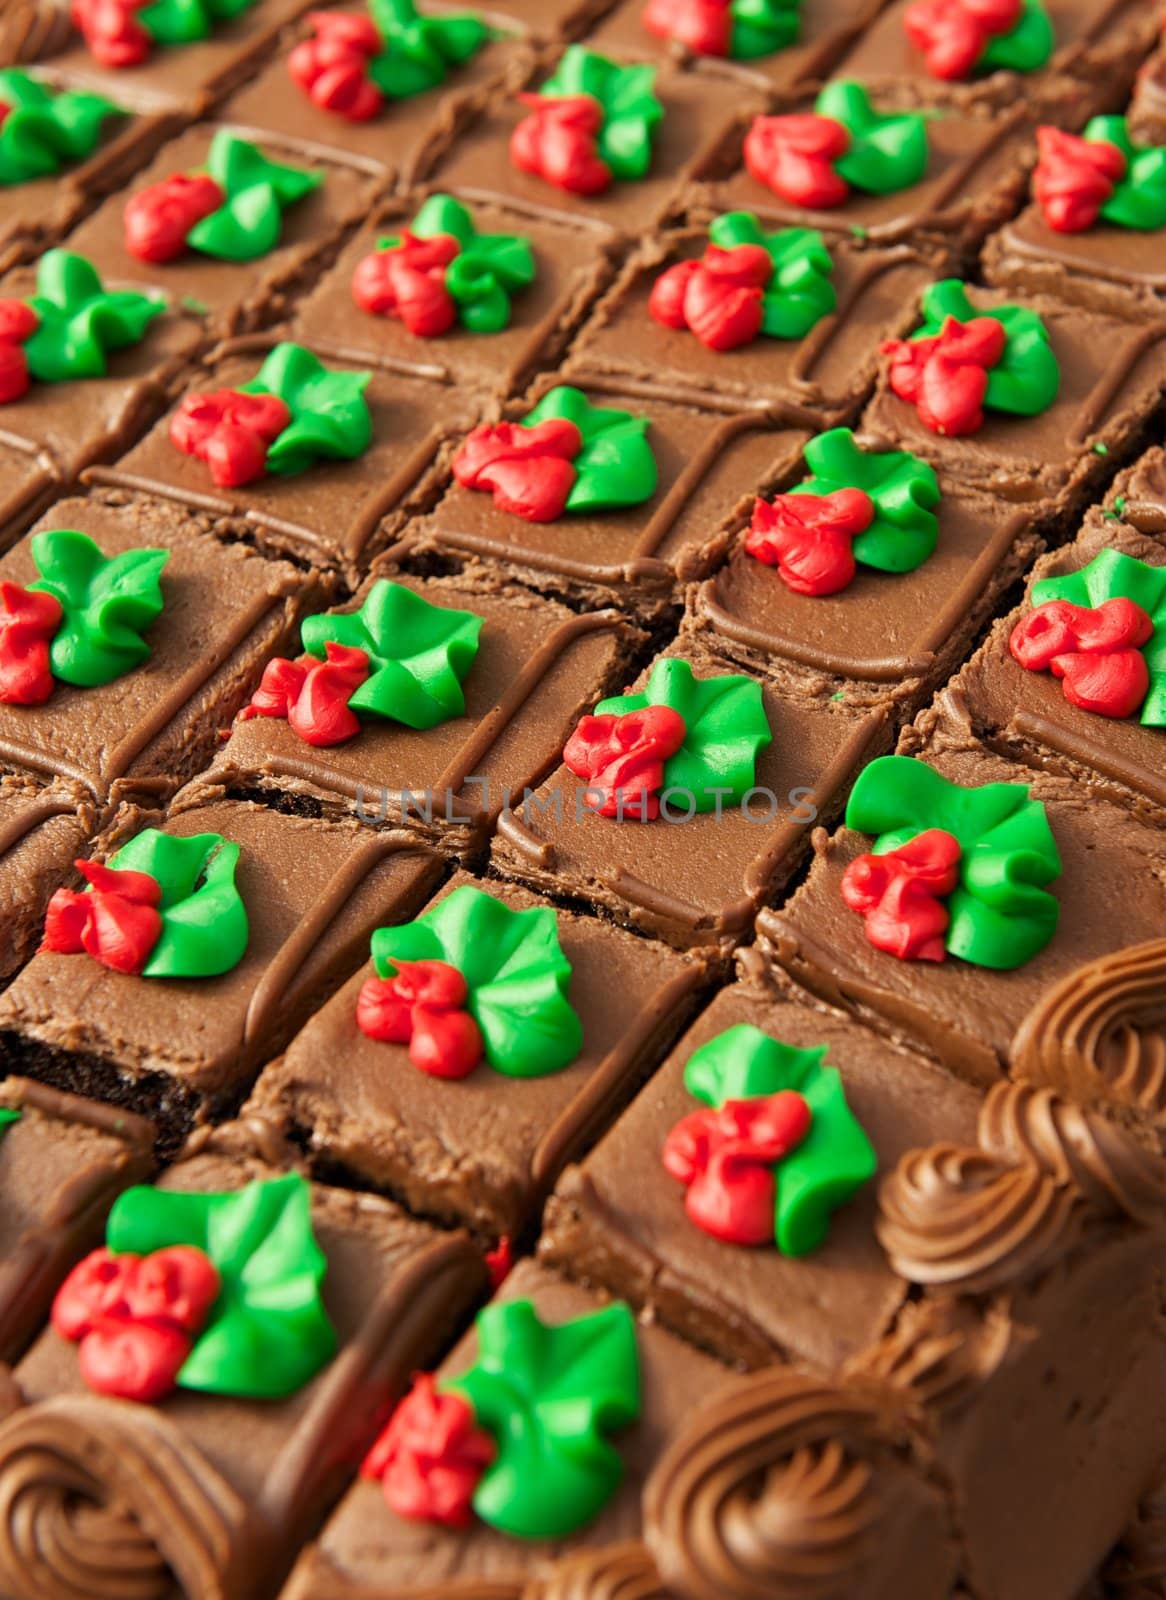 A chocolate frosted cake cut into squares with a red flower and green leaf on each piece